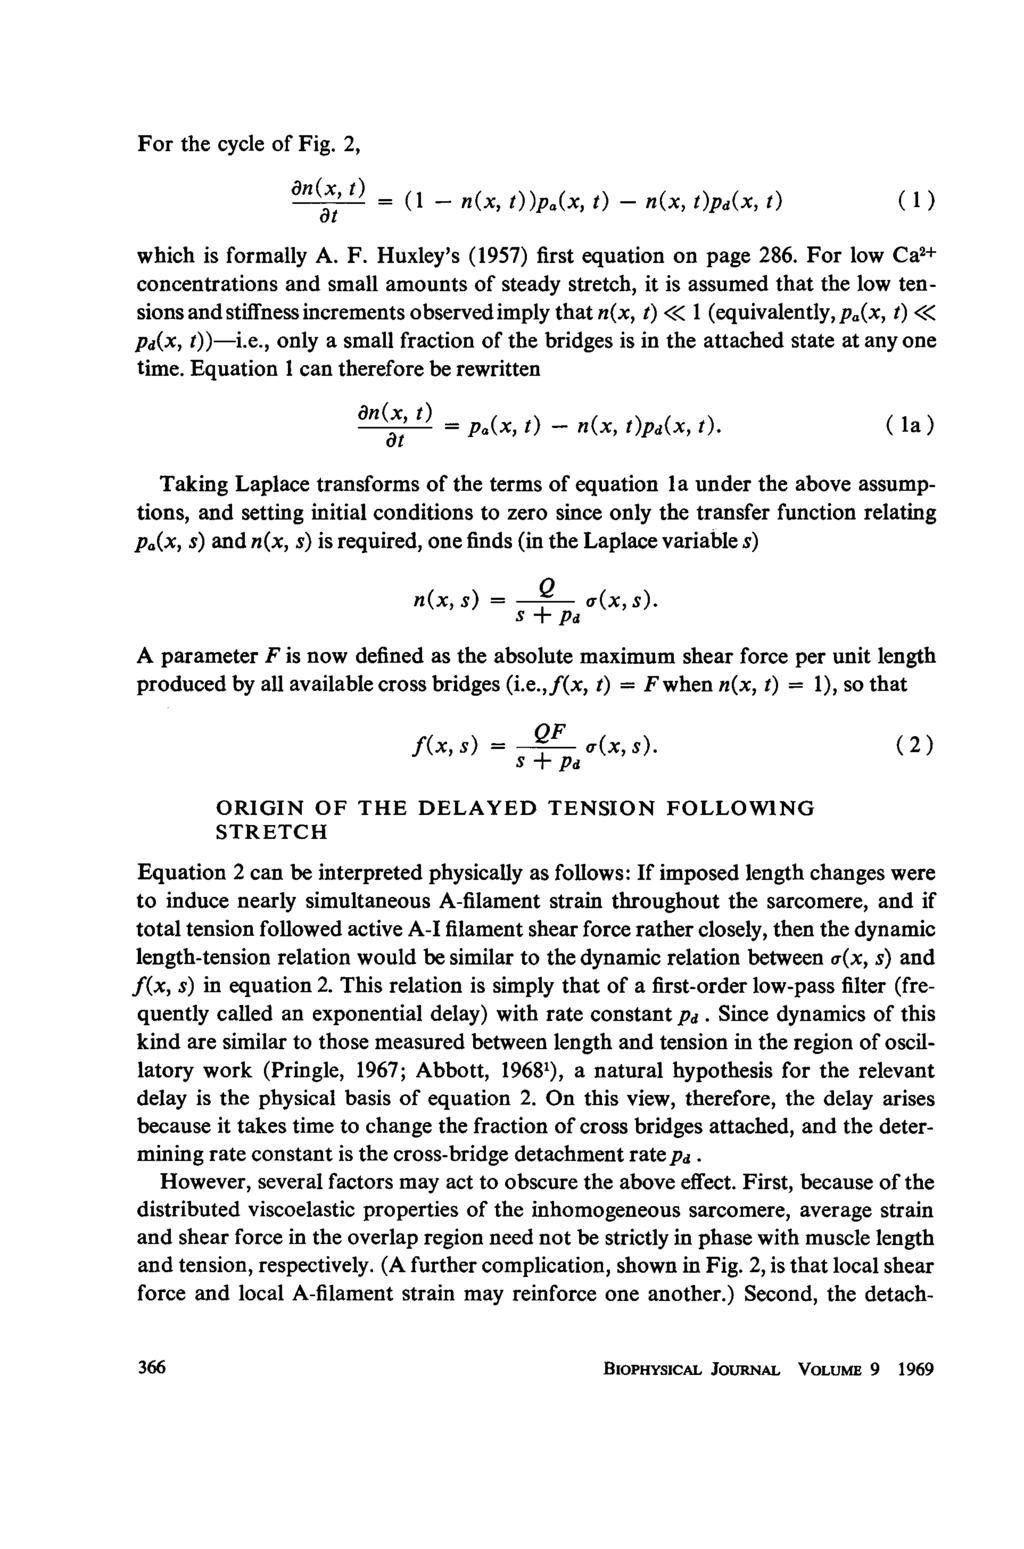 For the cycle of Fig. 2, an(x,t ( -n(x, t) )pa(xx, t) - n(x, t)pd(x, t) (1) at which is formally A. F. Huxley's (1957) first equation on page 286.